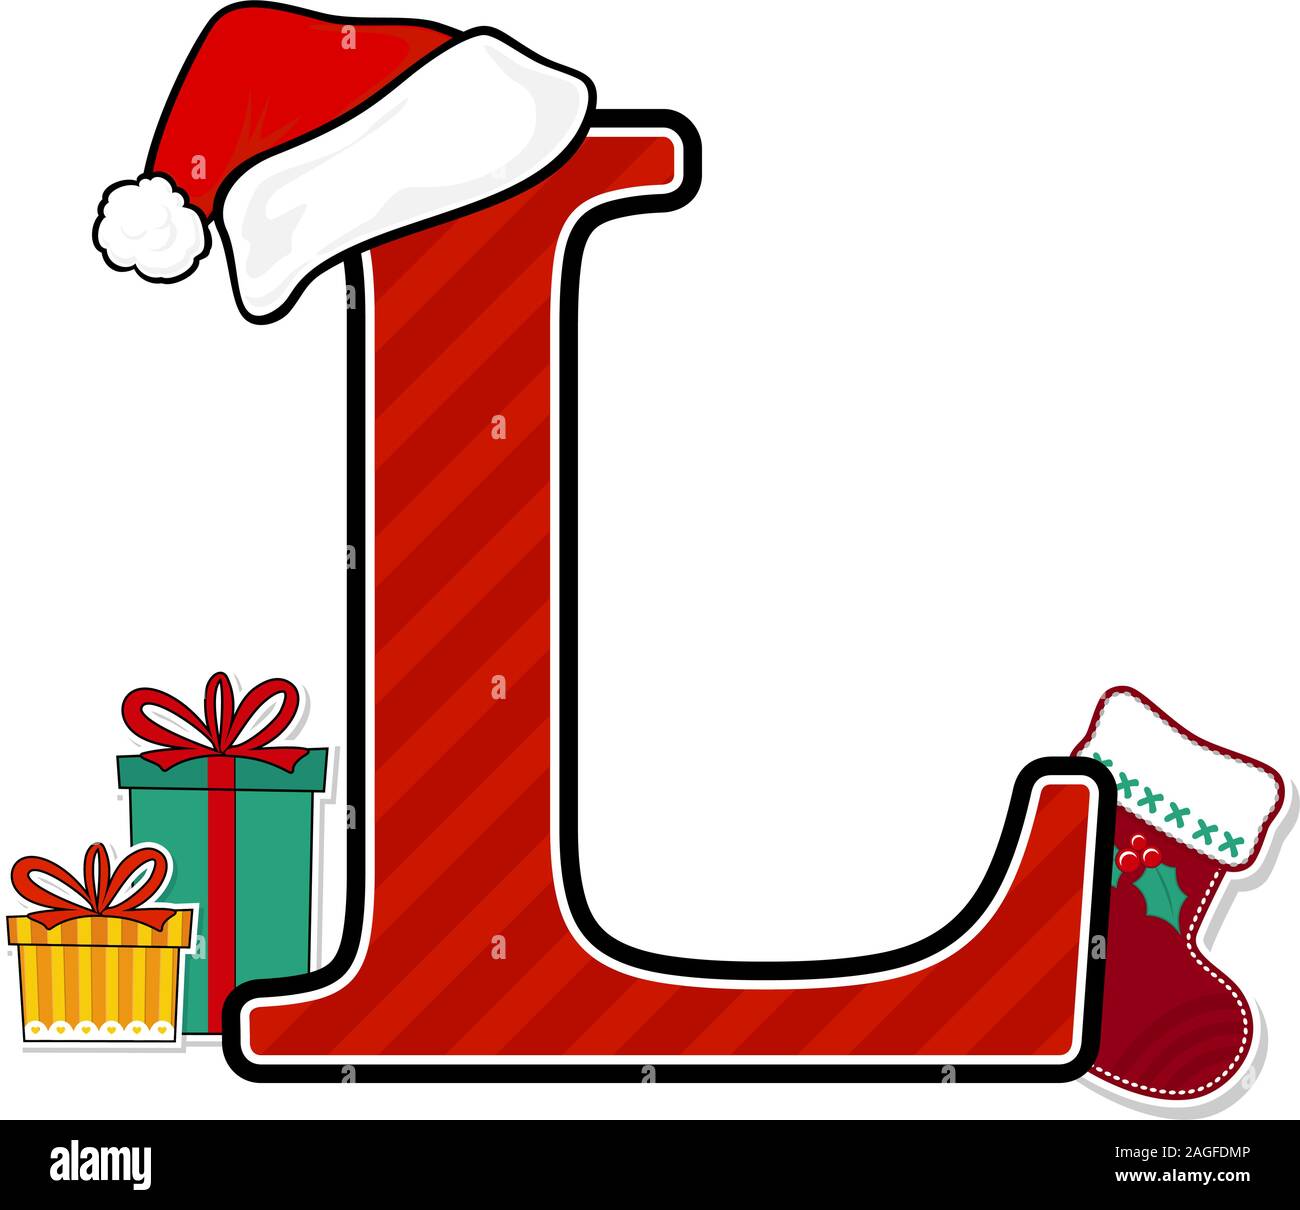 https://c8.alamy.com/comp/2AGFDMP/capital-letter-l-with-red-santas-hat-and-christmas-design-elements-isolated-on-white-background-can-be-used-for-holiday-season-card-nursery-decorat-2AGFDMP.jpg